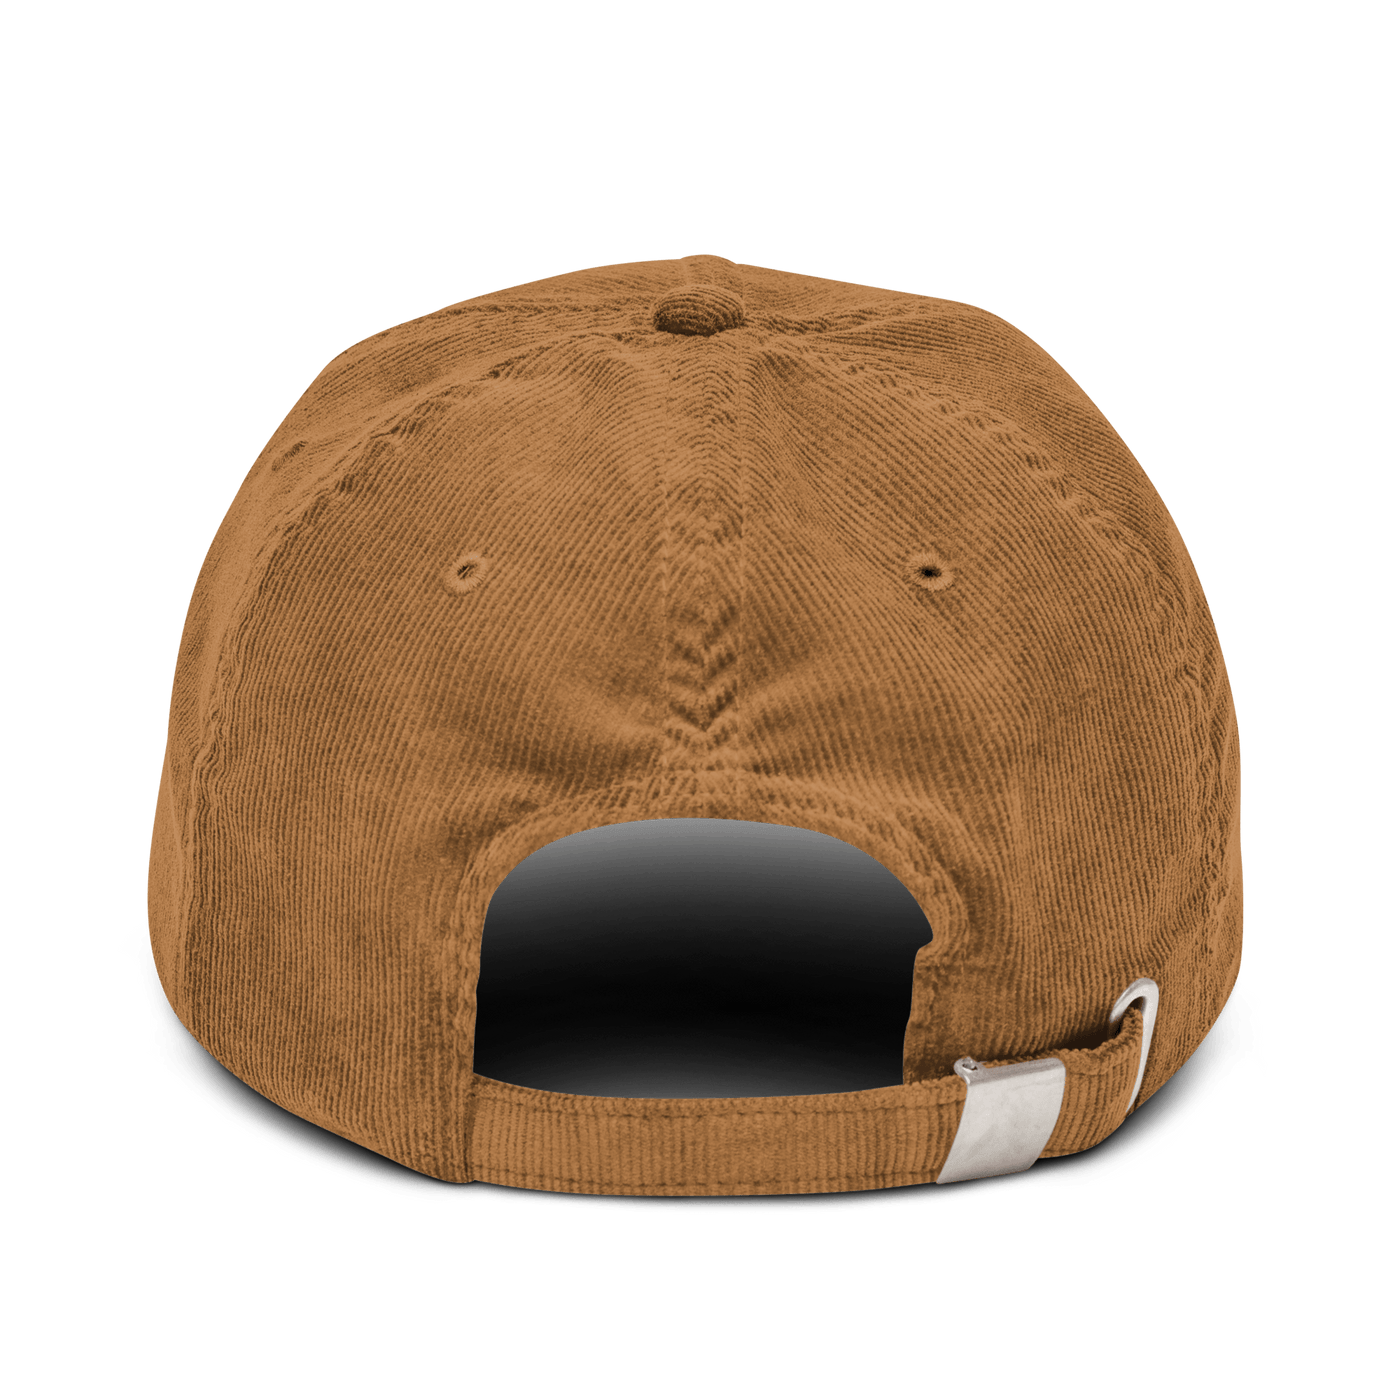 Call me Corduroy hat - Dark Olive - - Just Another Cap Store